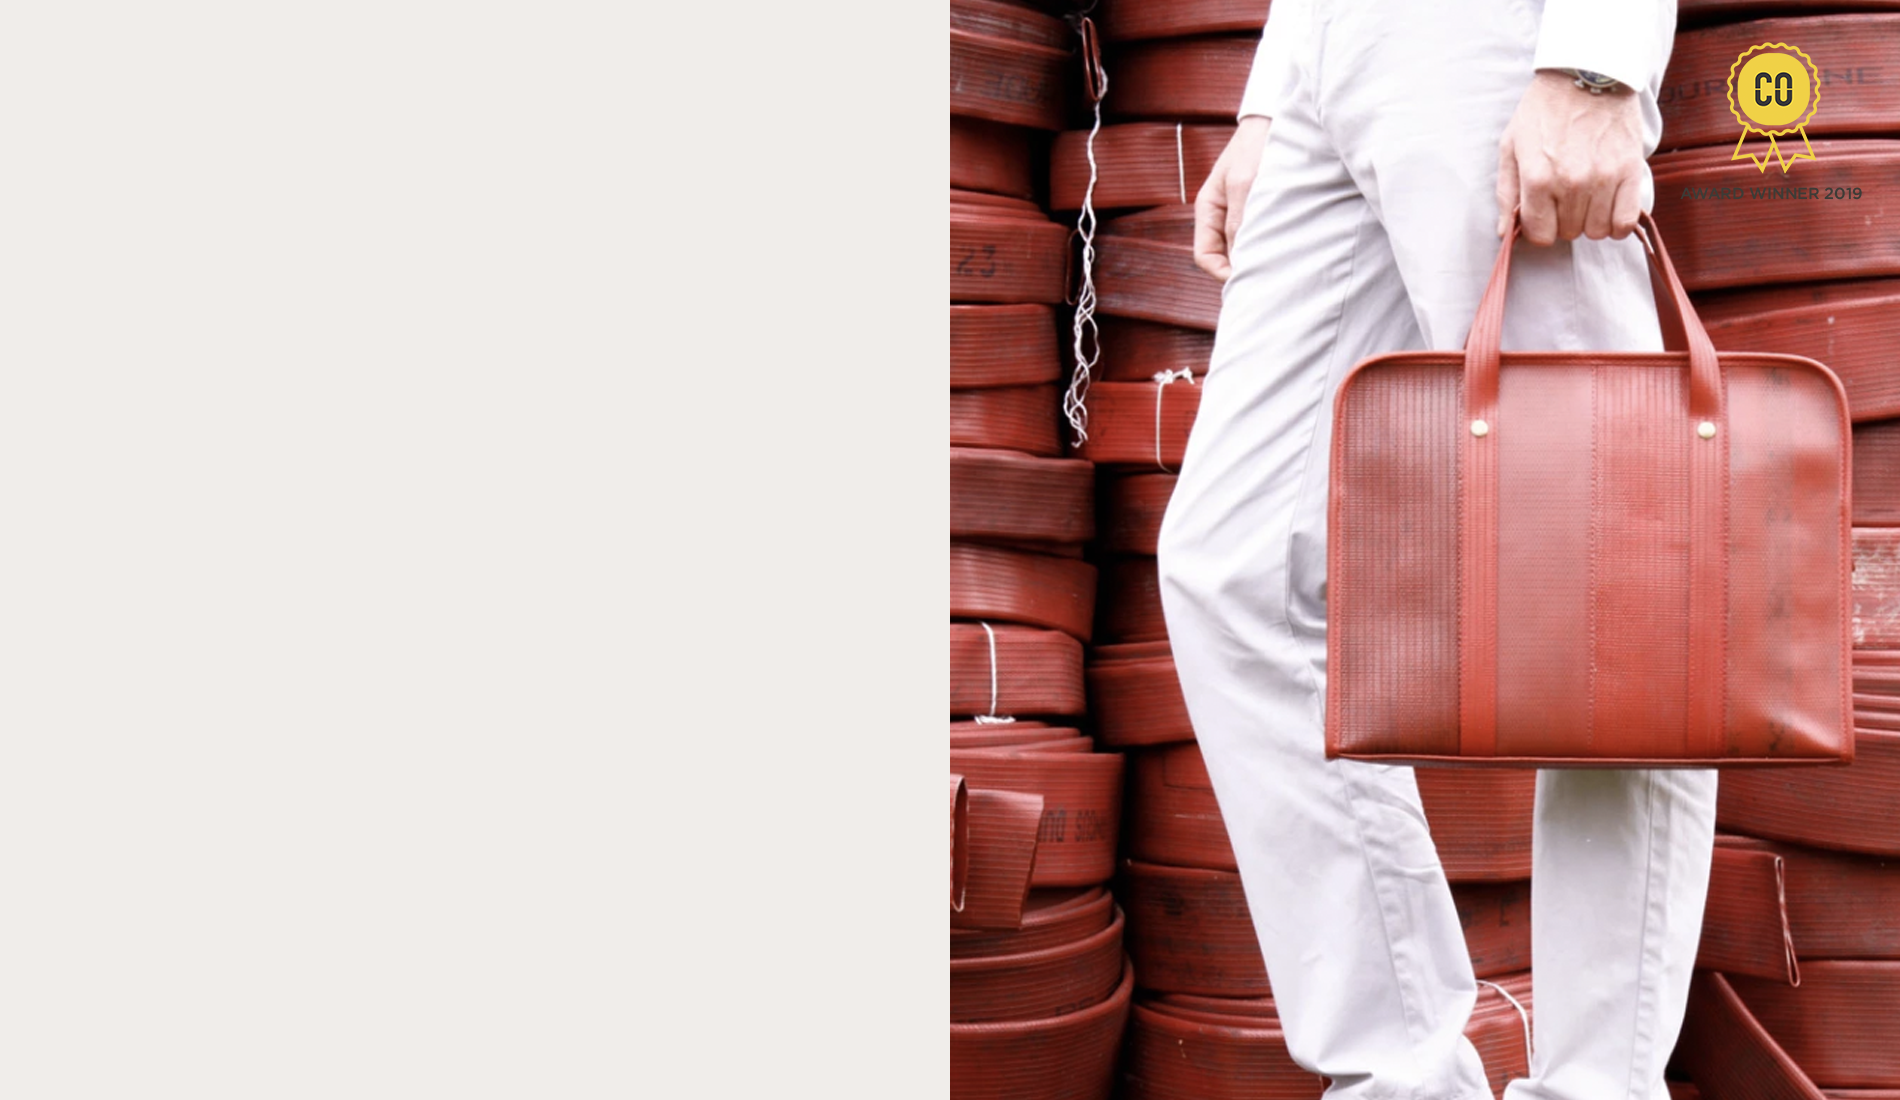 Person holding Elvis & Kresse upcycled bag in front of a stack of hose pipes